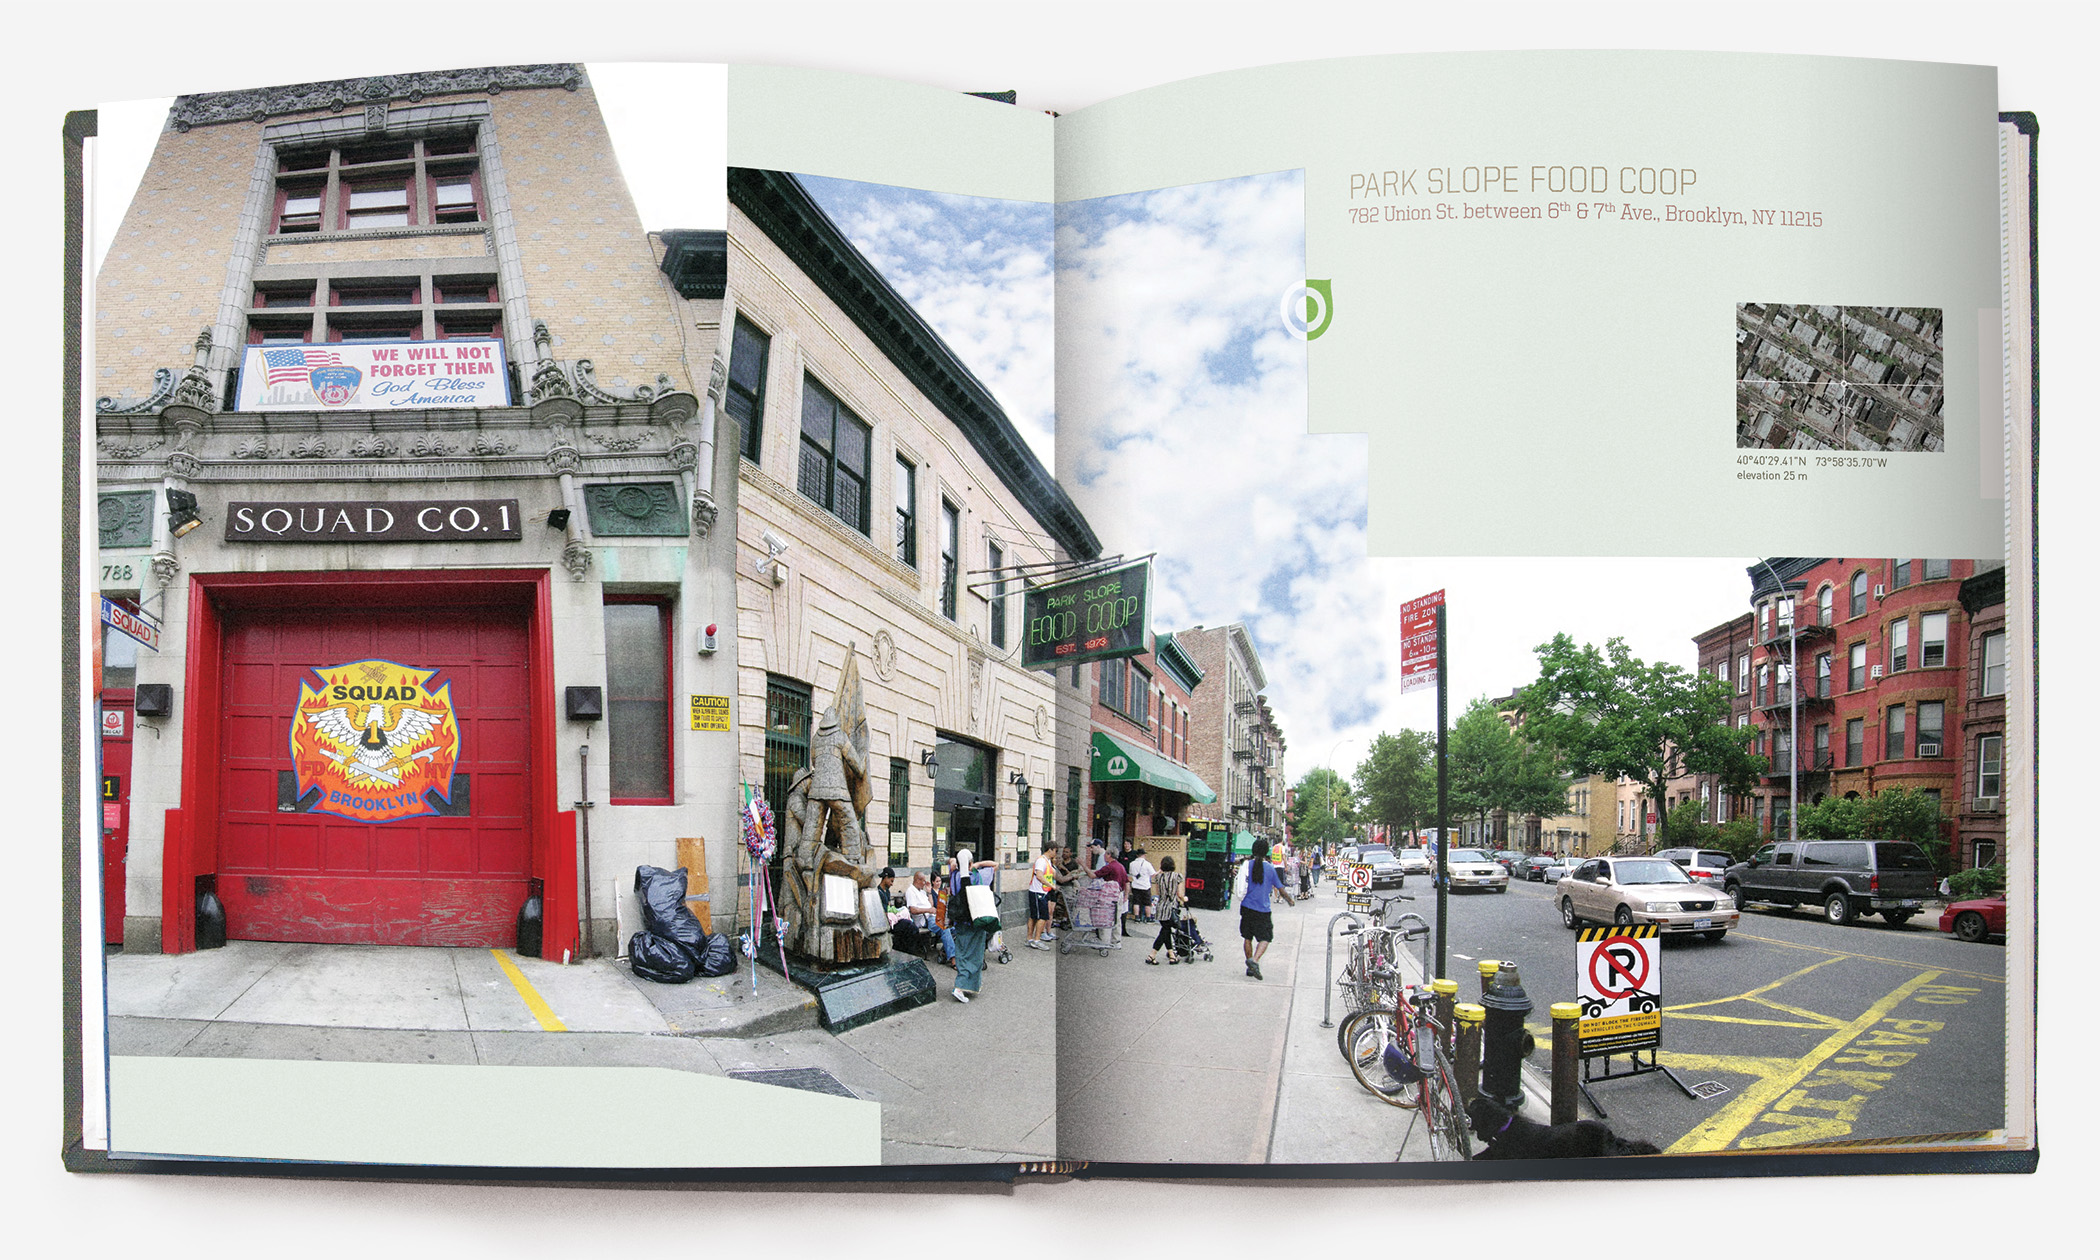 Book spread showing the Park Slope Food Coop